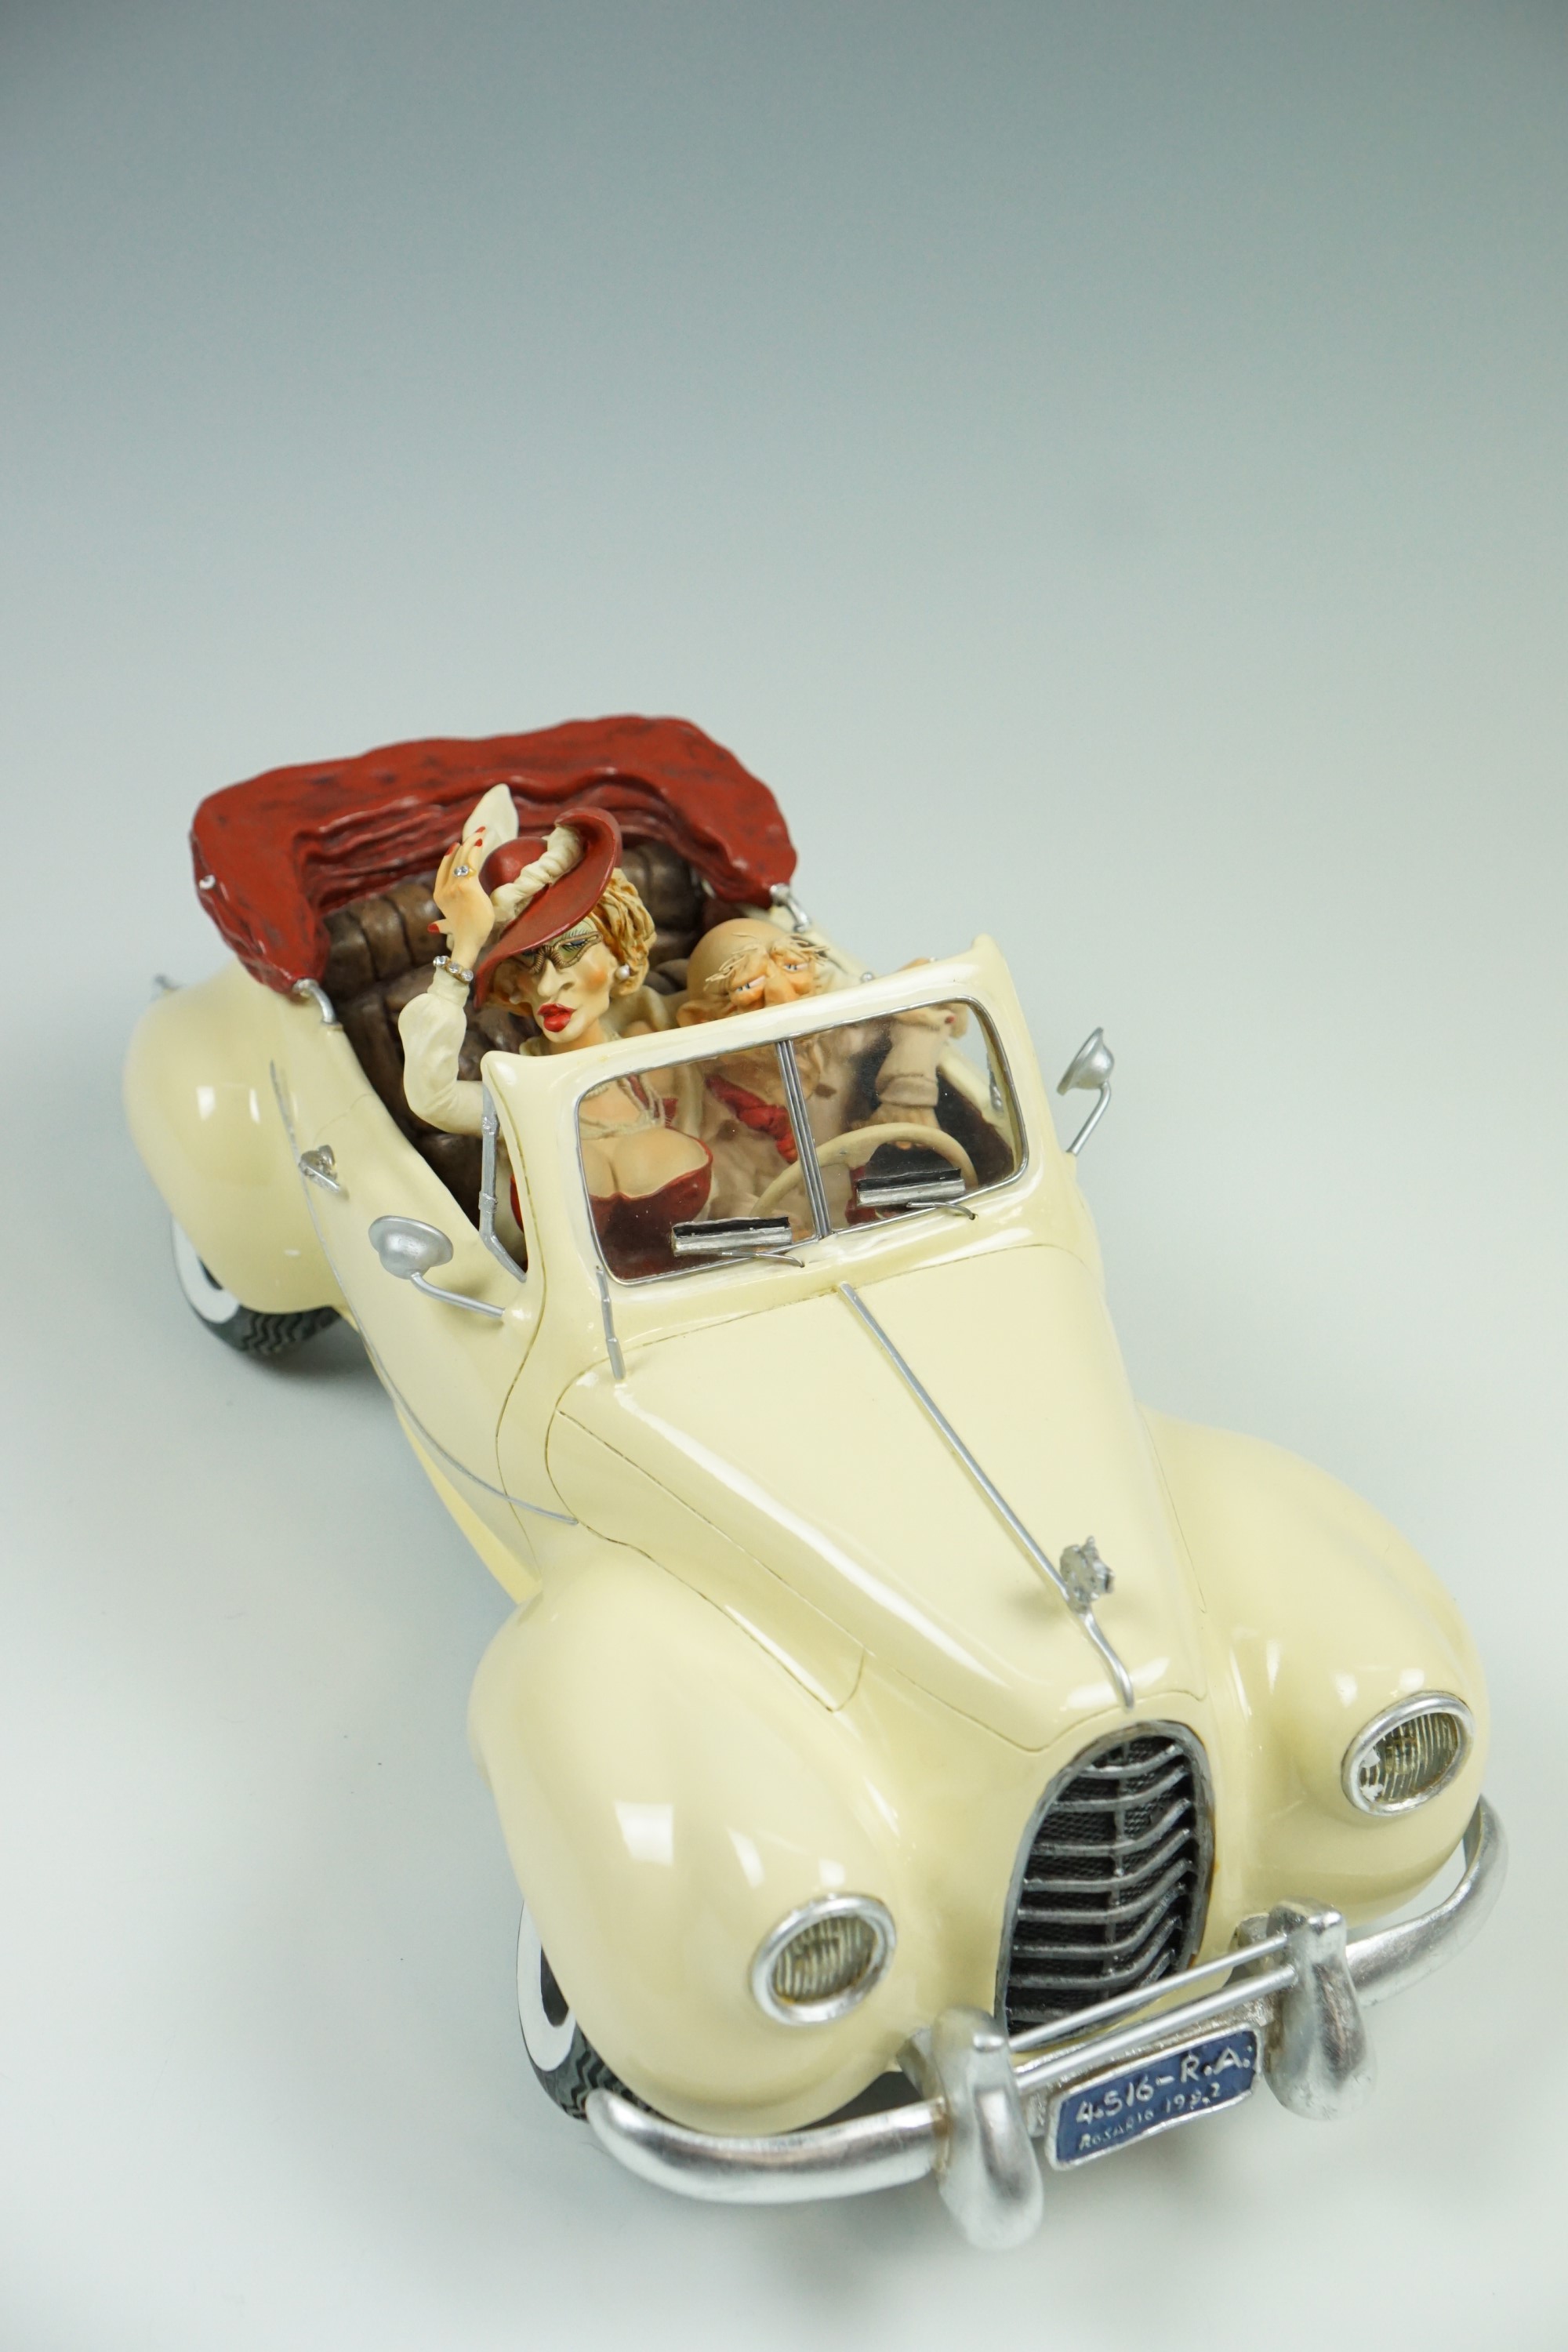 The comic art of Guillermo Forchino "Le Cabriolet", 35 cm long - Image 2 of 6